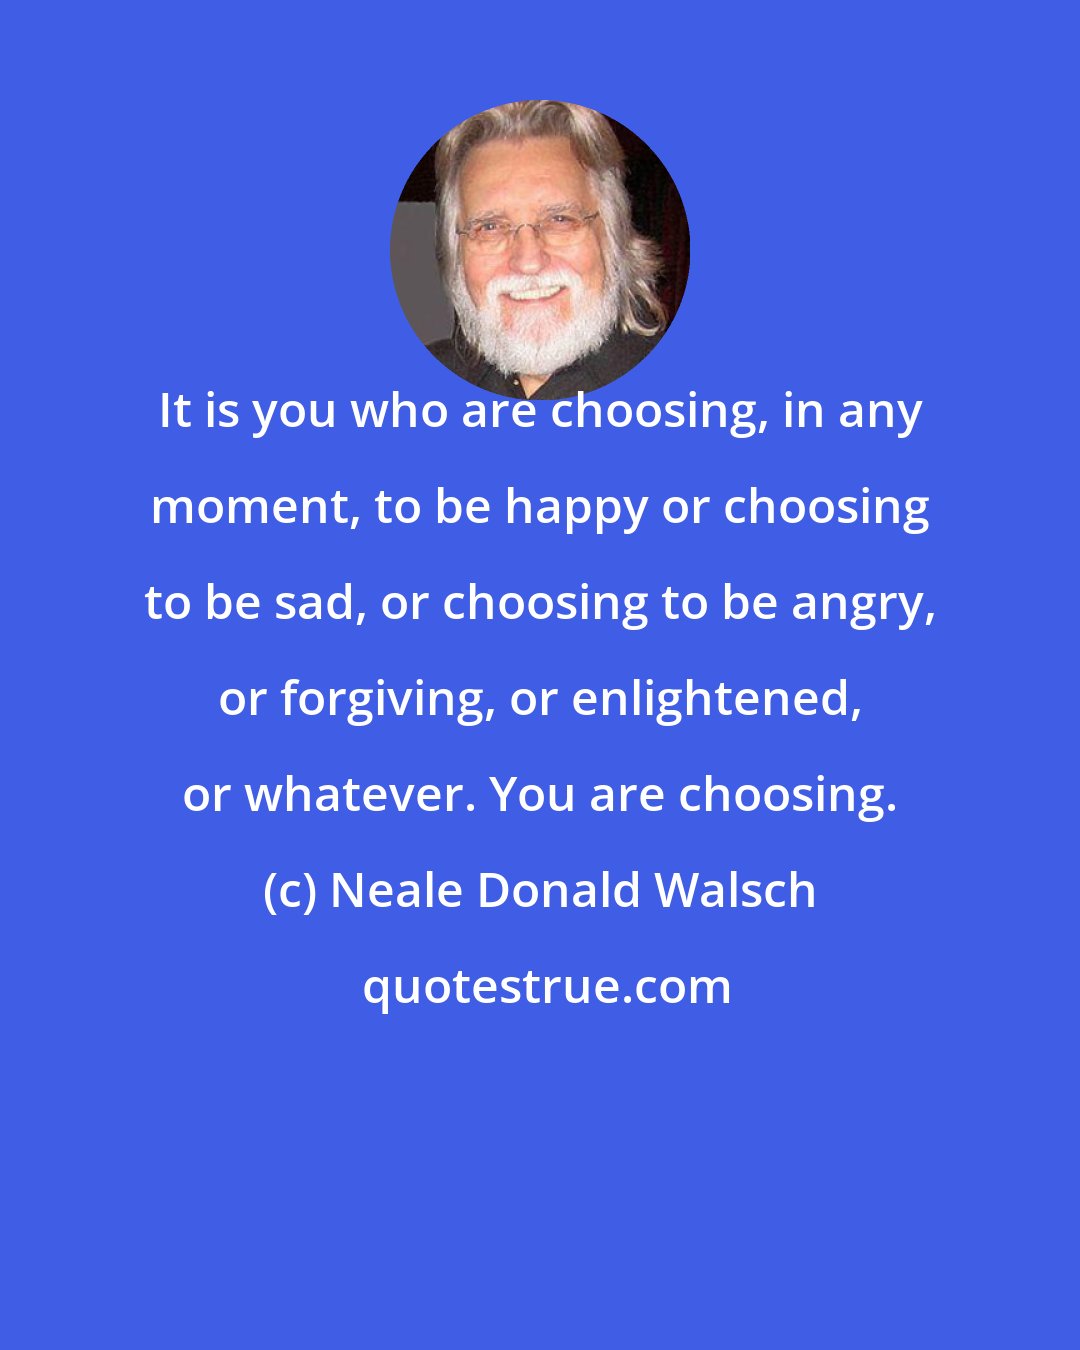 Neale Donald Walsch: It is you who are choosing, in any moment, to be happy or choosing to be sad, or choosing to be angry, or forgiving, or enlightened, or whatever. You are choosing.